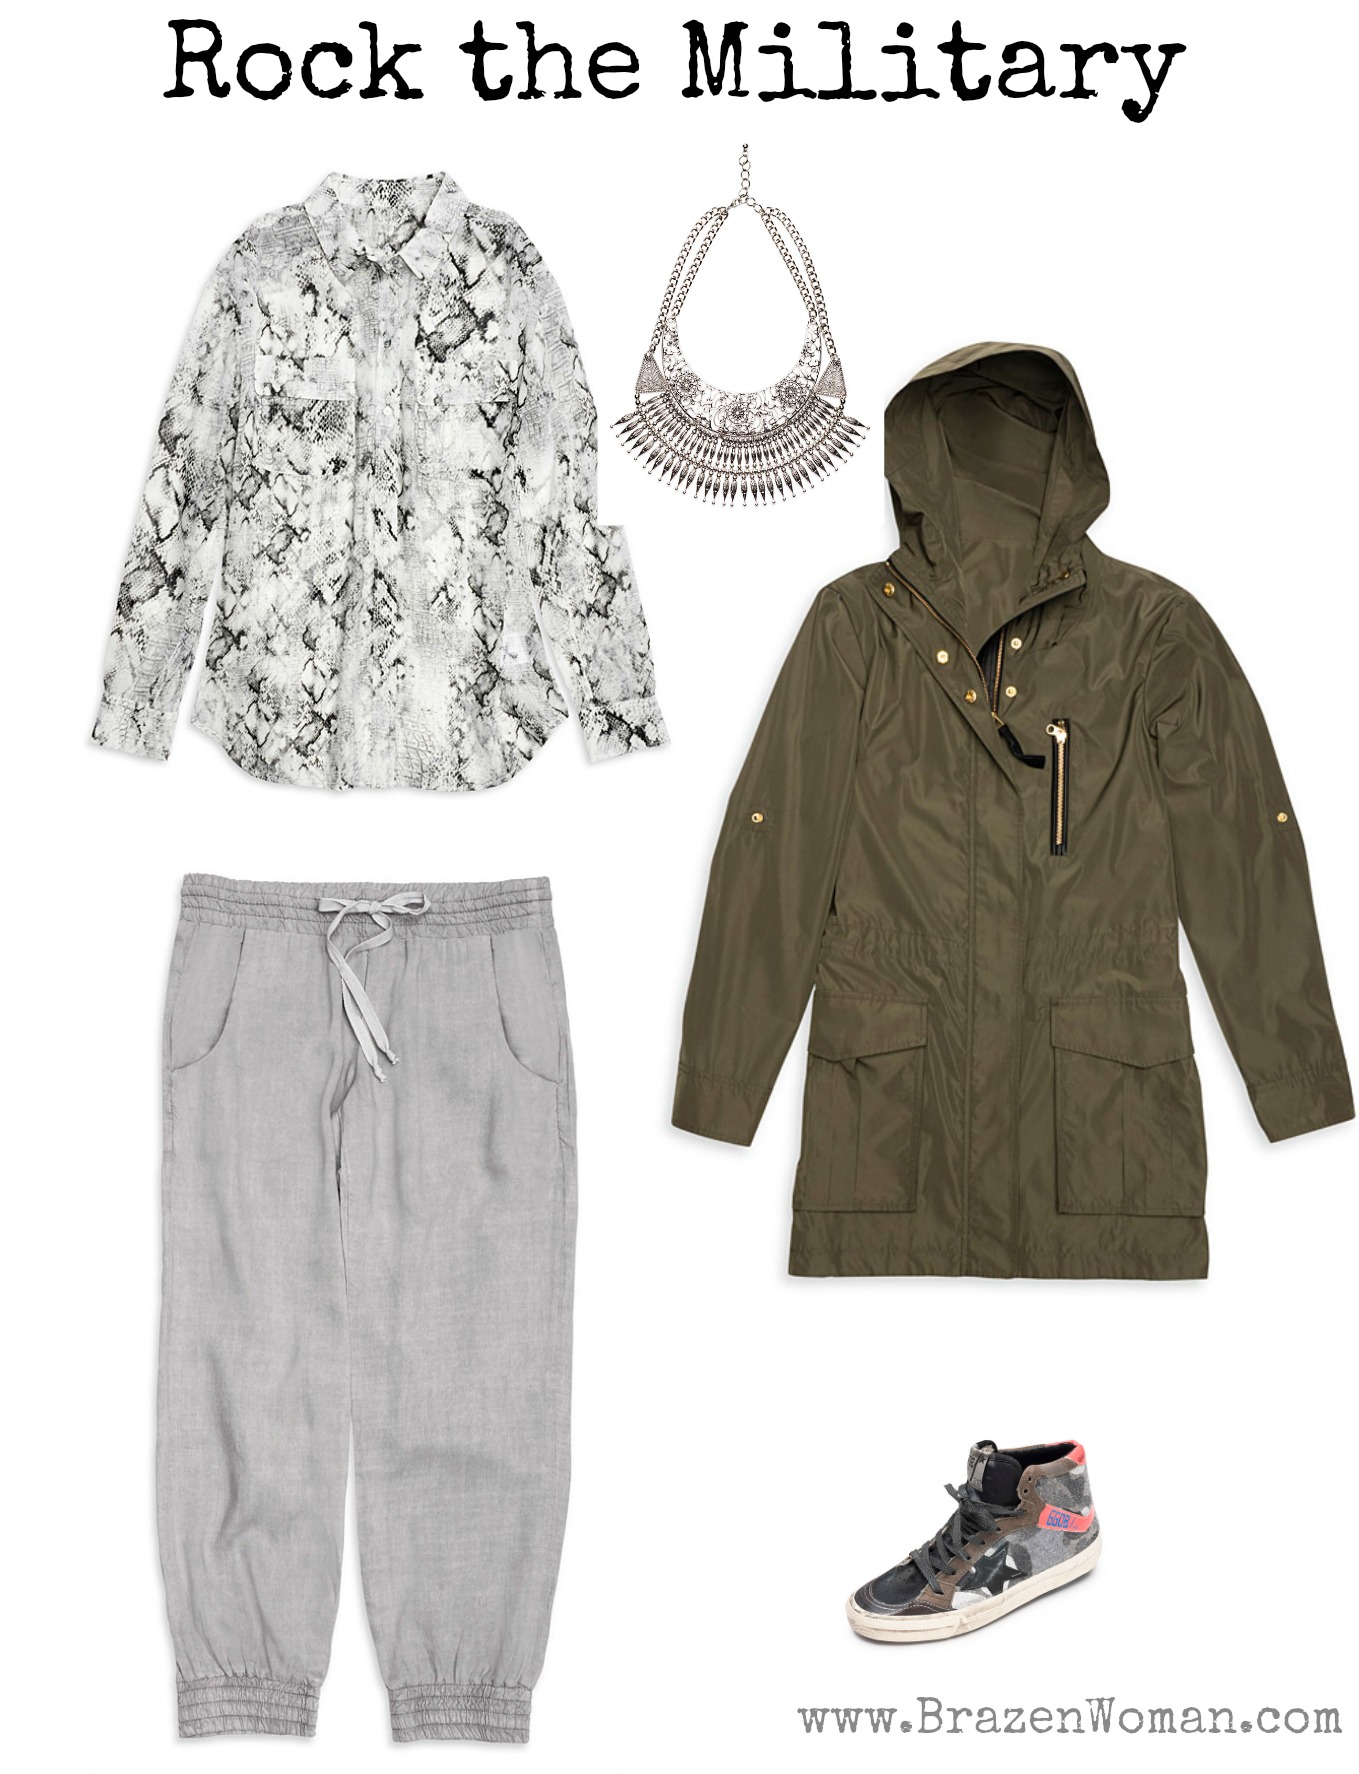 Spring Trend: How to Rock the Military Look - BrazenWoman